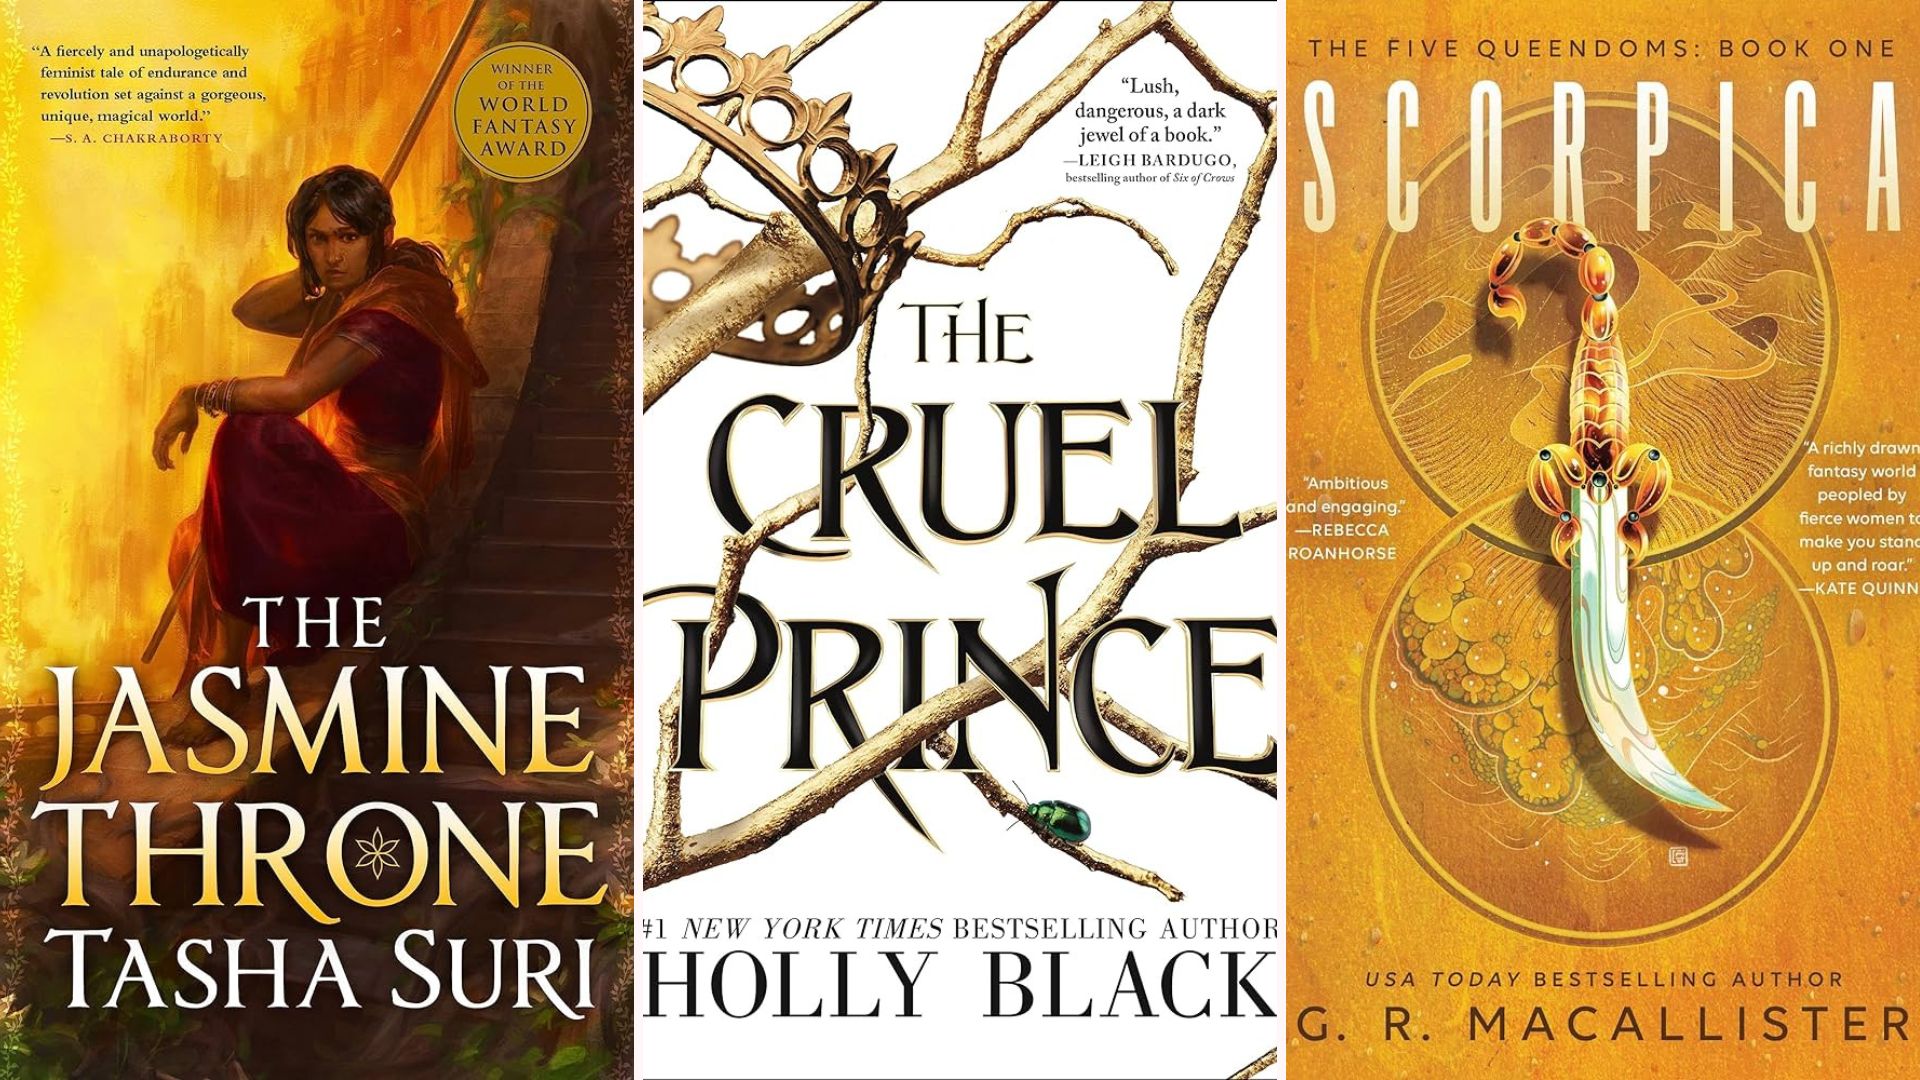 Book covers for The Jasmine Throne, The Cruel Prince, Scorpica